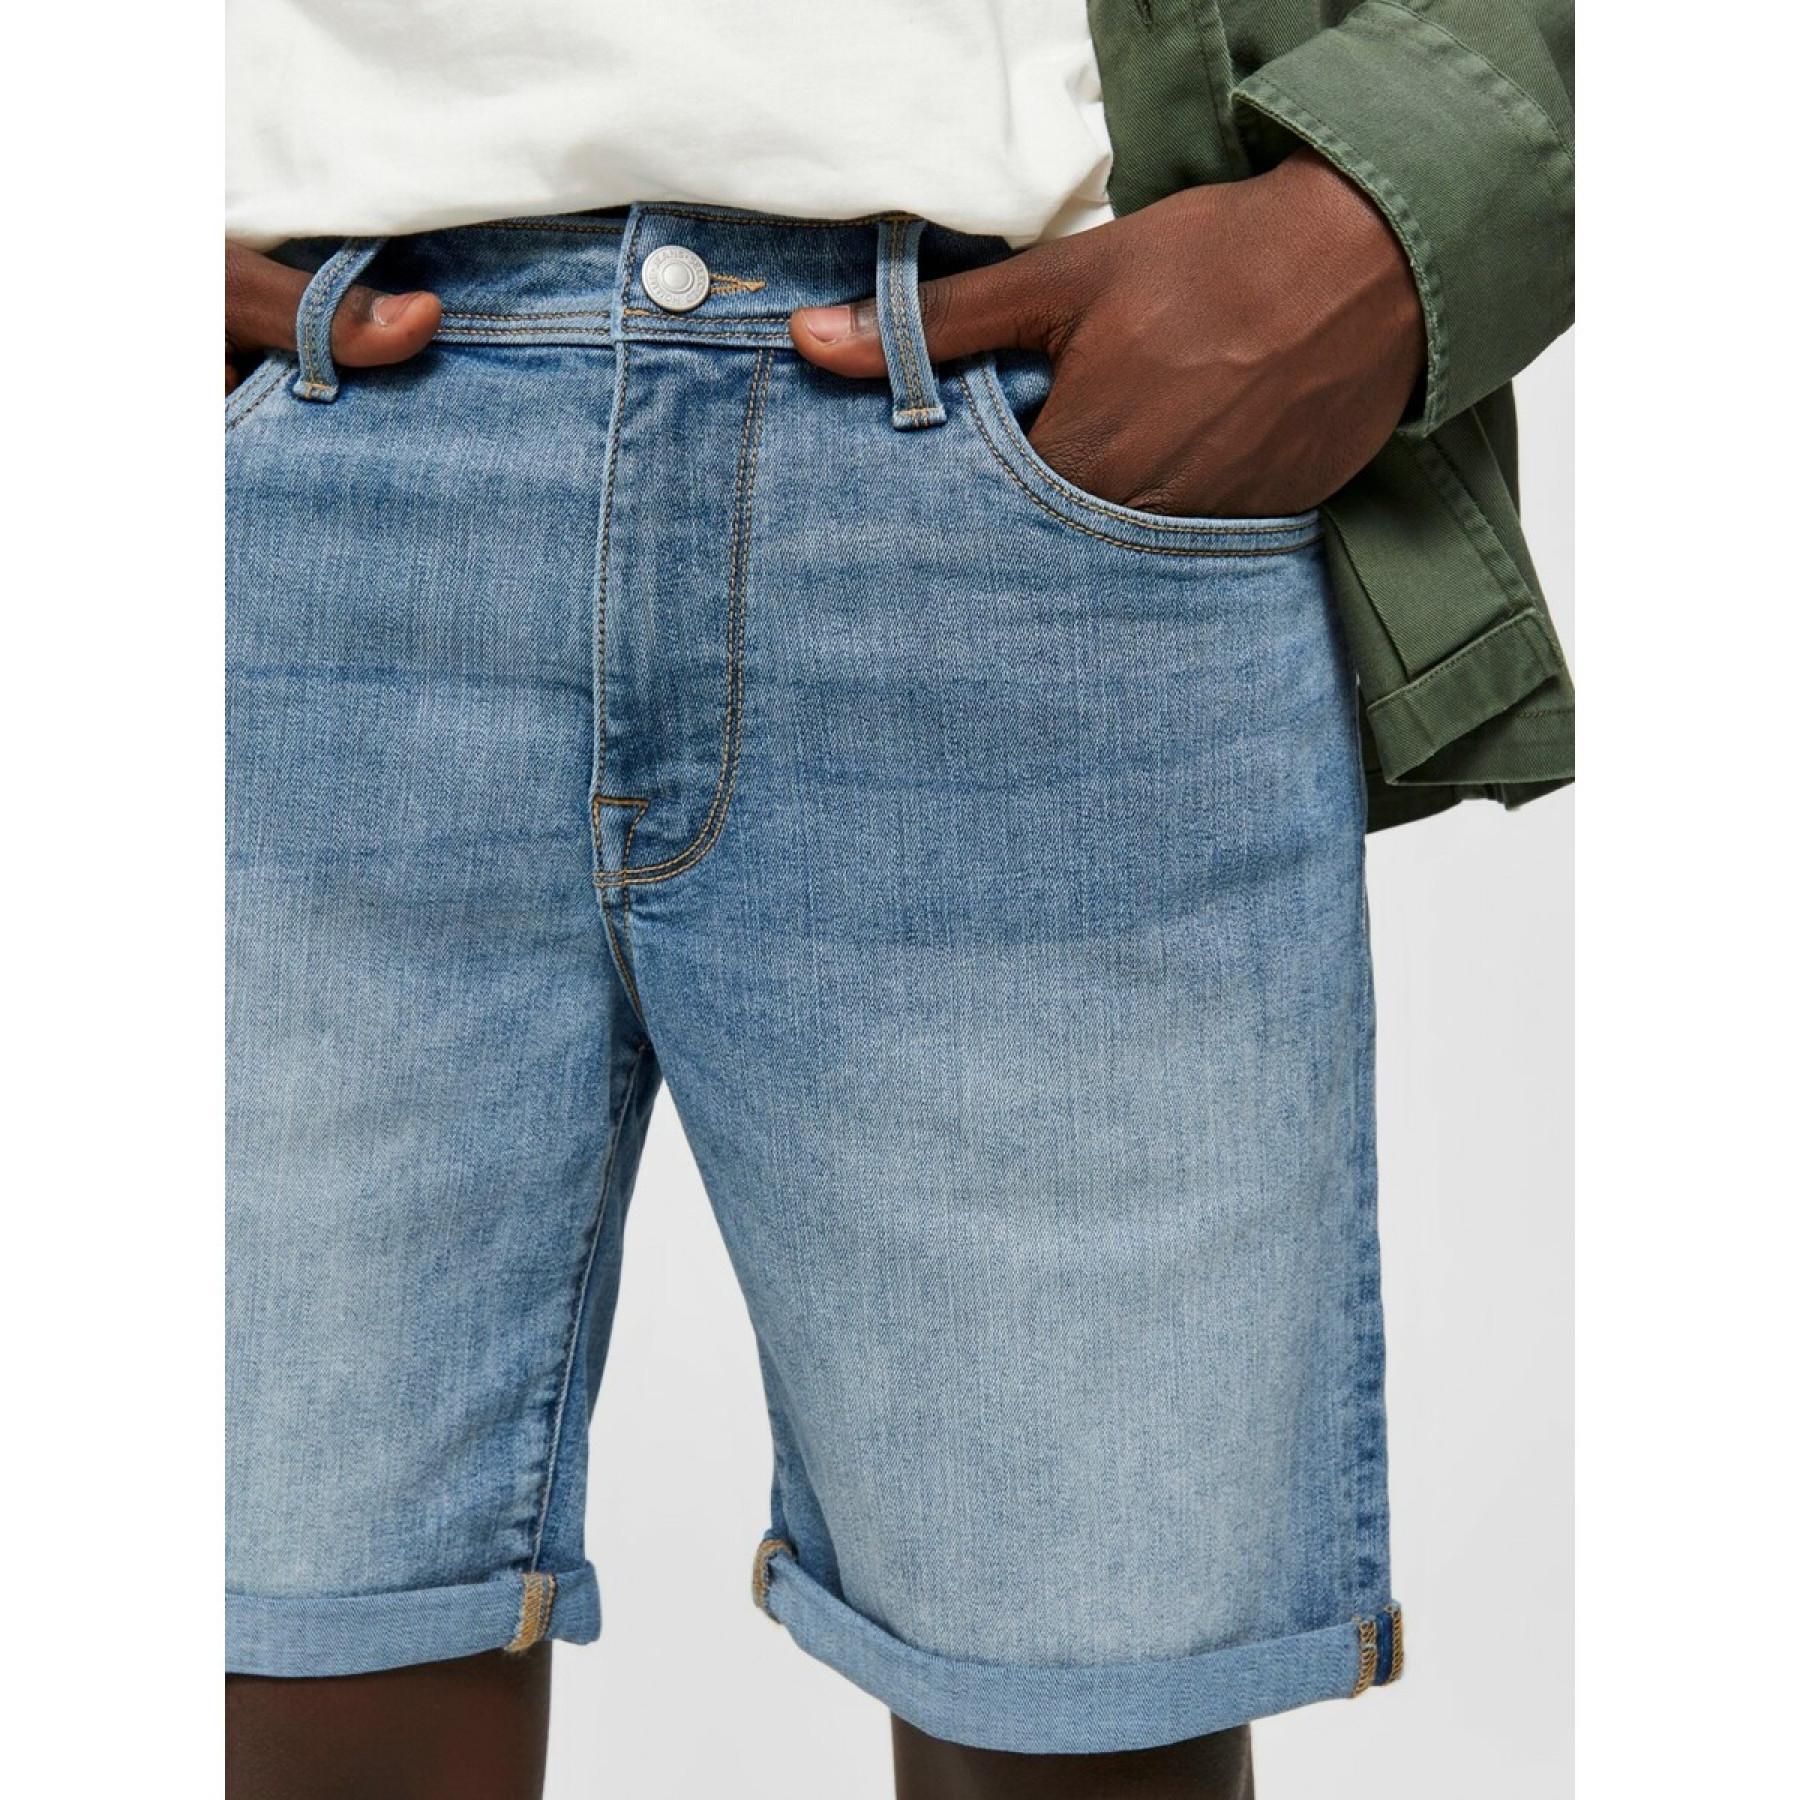 Jeansshorts Selected Alex 330